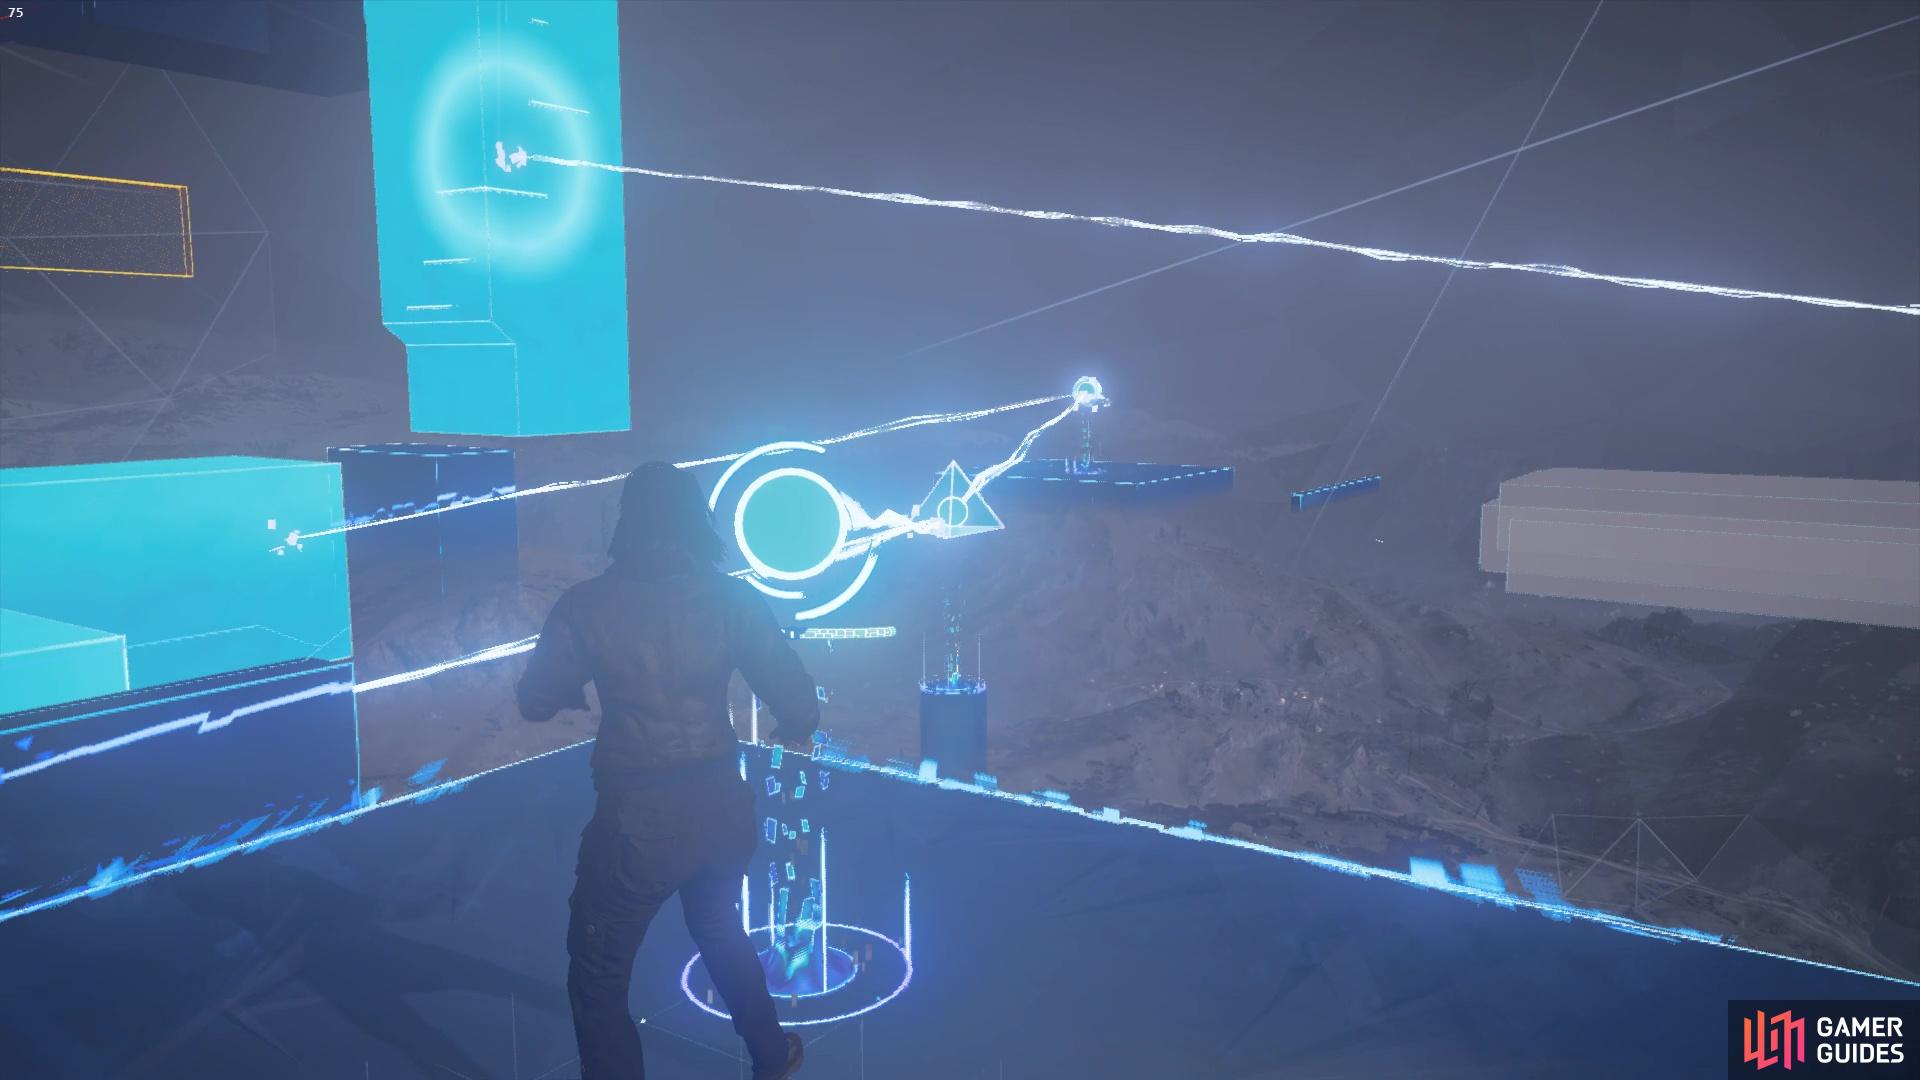 This is a complicated light beam puzzle since there are so many beams and unstabilized structures involved.